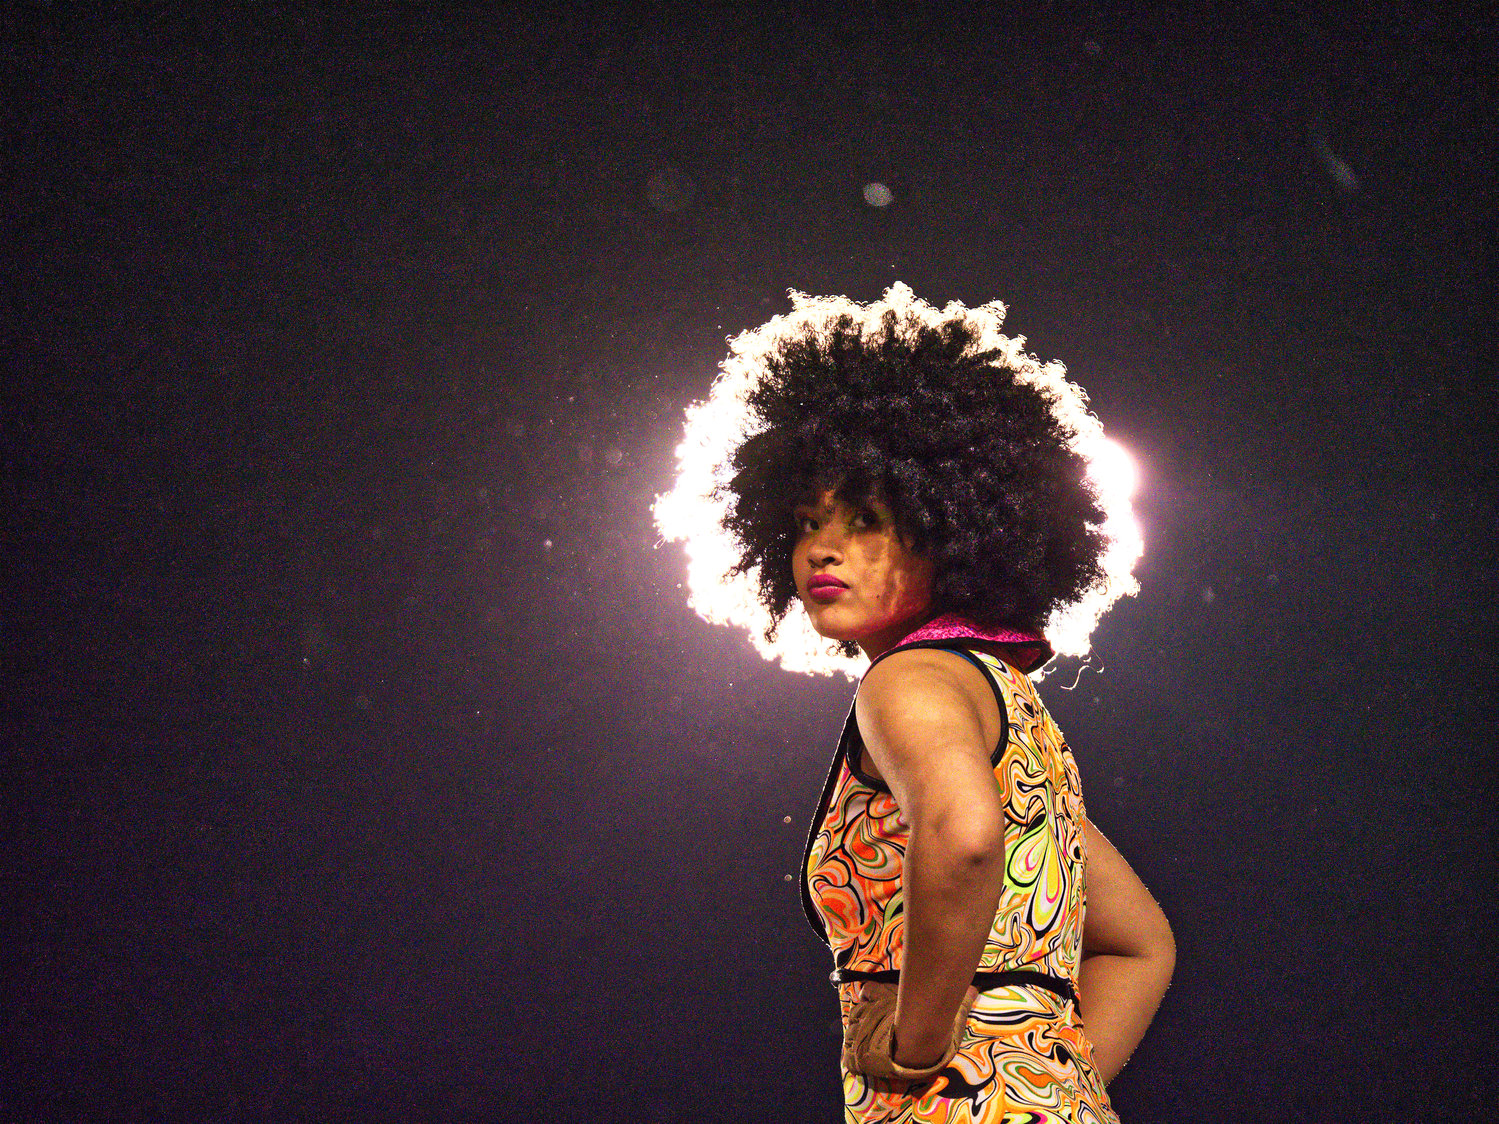 A Sound of the Swarm Mineola High School marching band color guard member’s afro is back-lit by stadium lights.